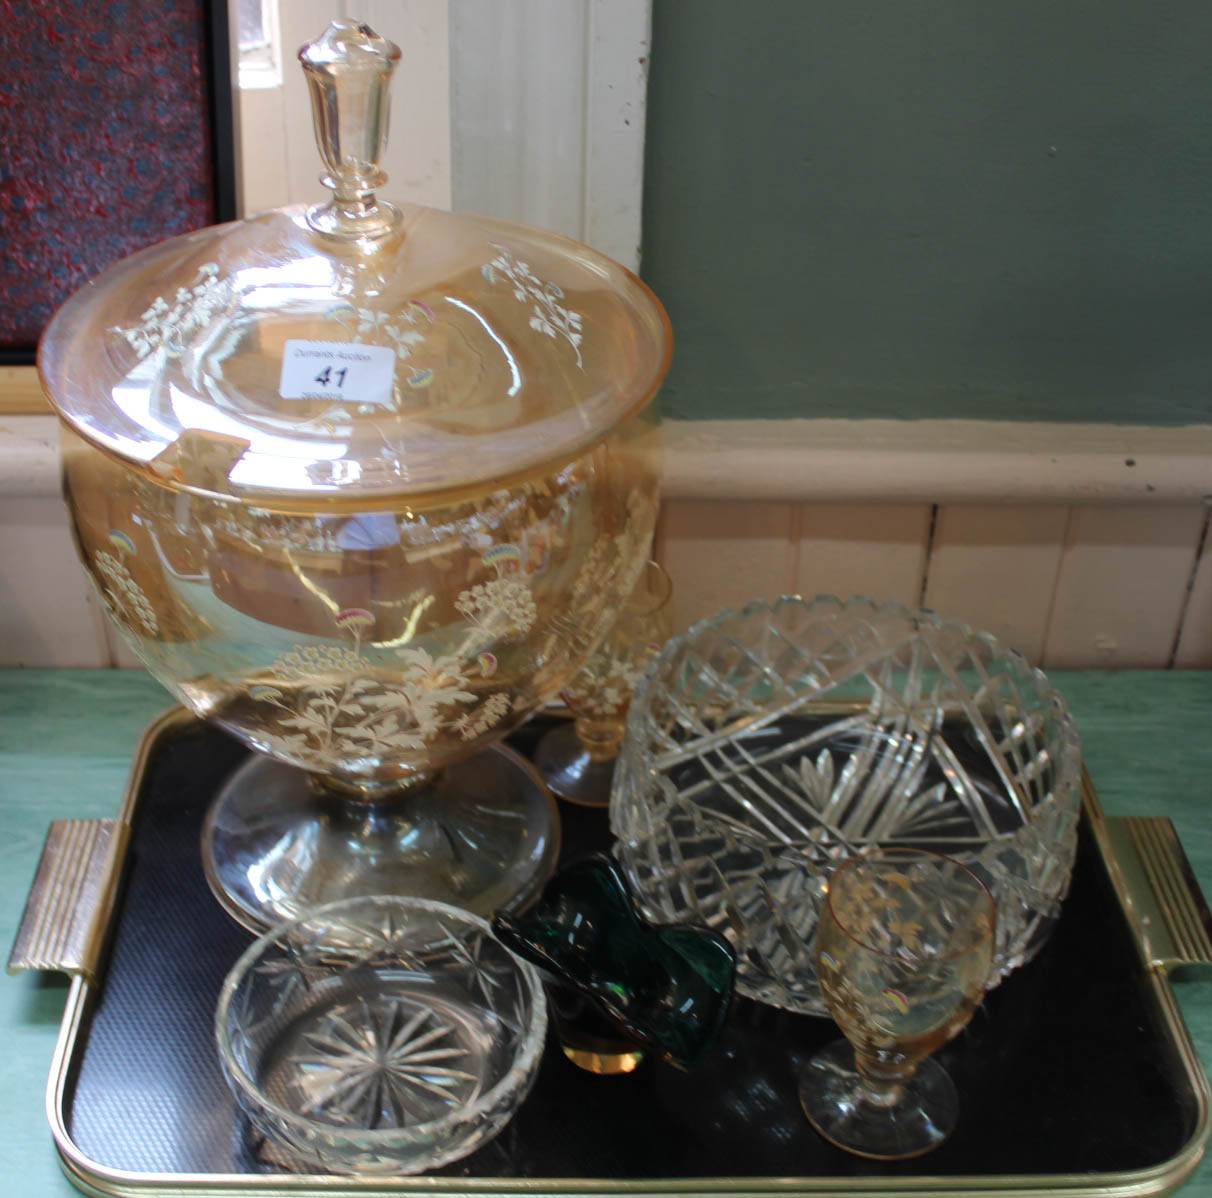 An orange glass punch bowl plus other glassware